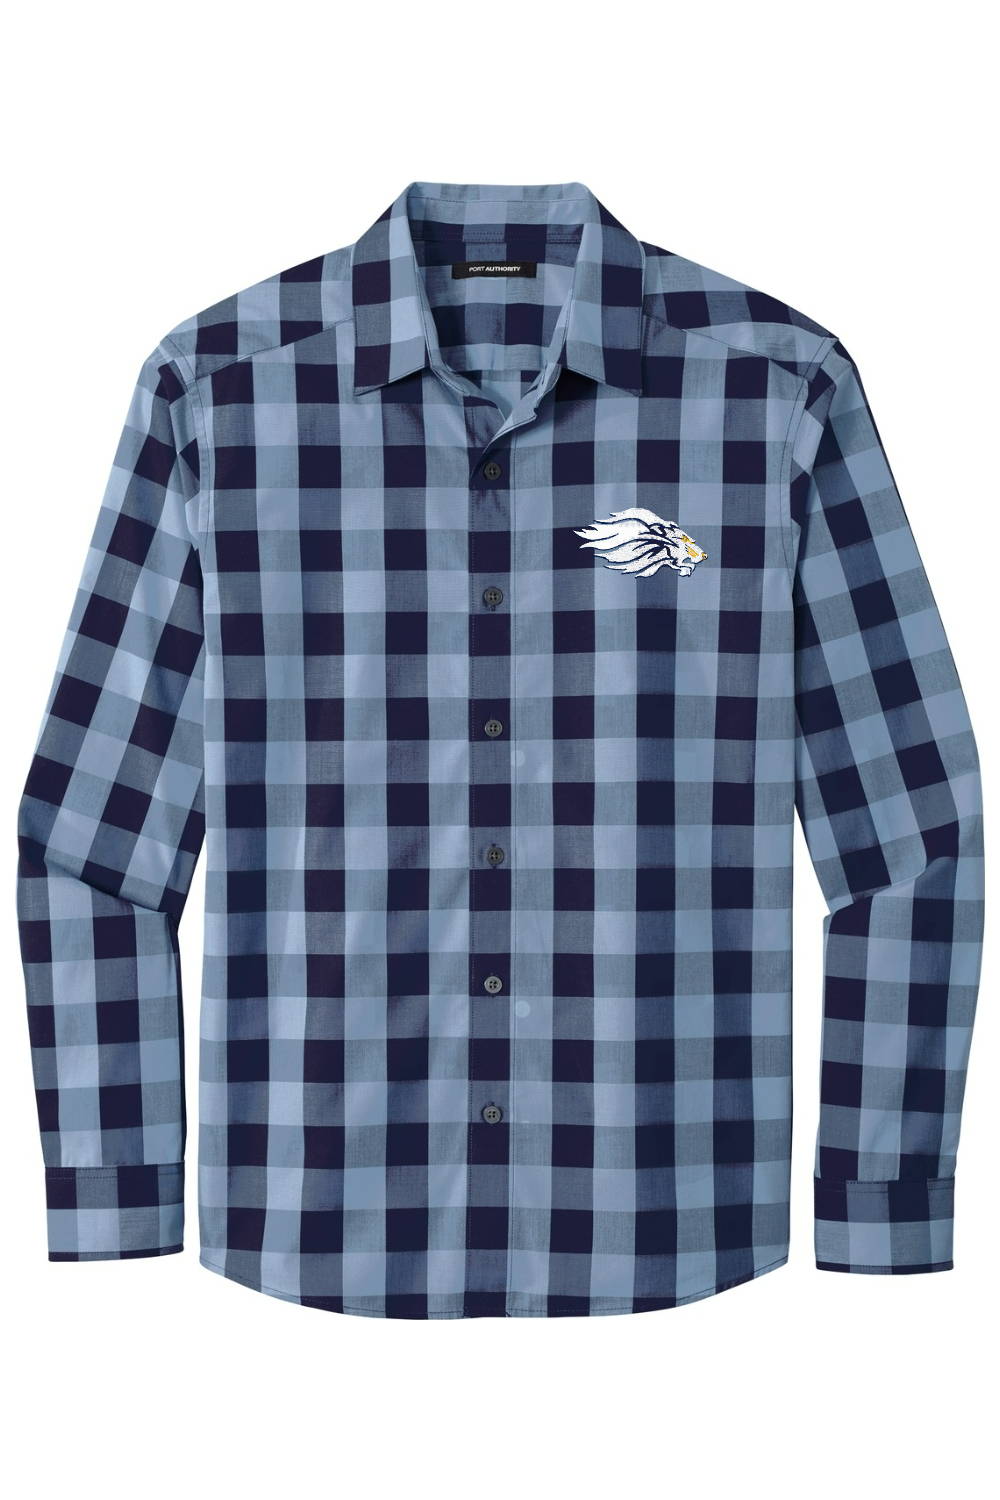 Lions Embroidered Port Authority Plaid Shirt